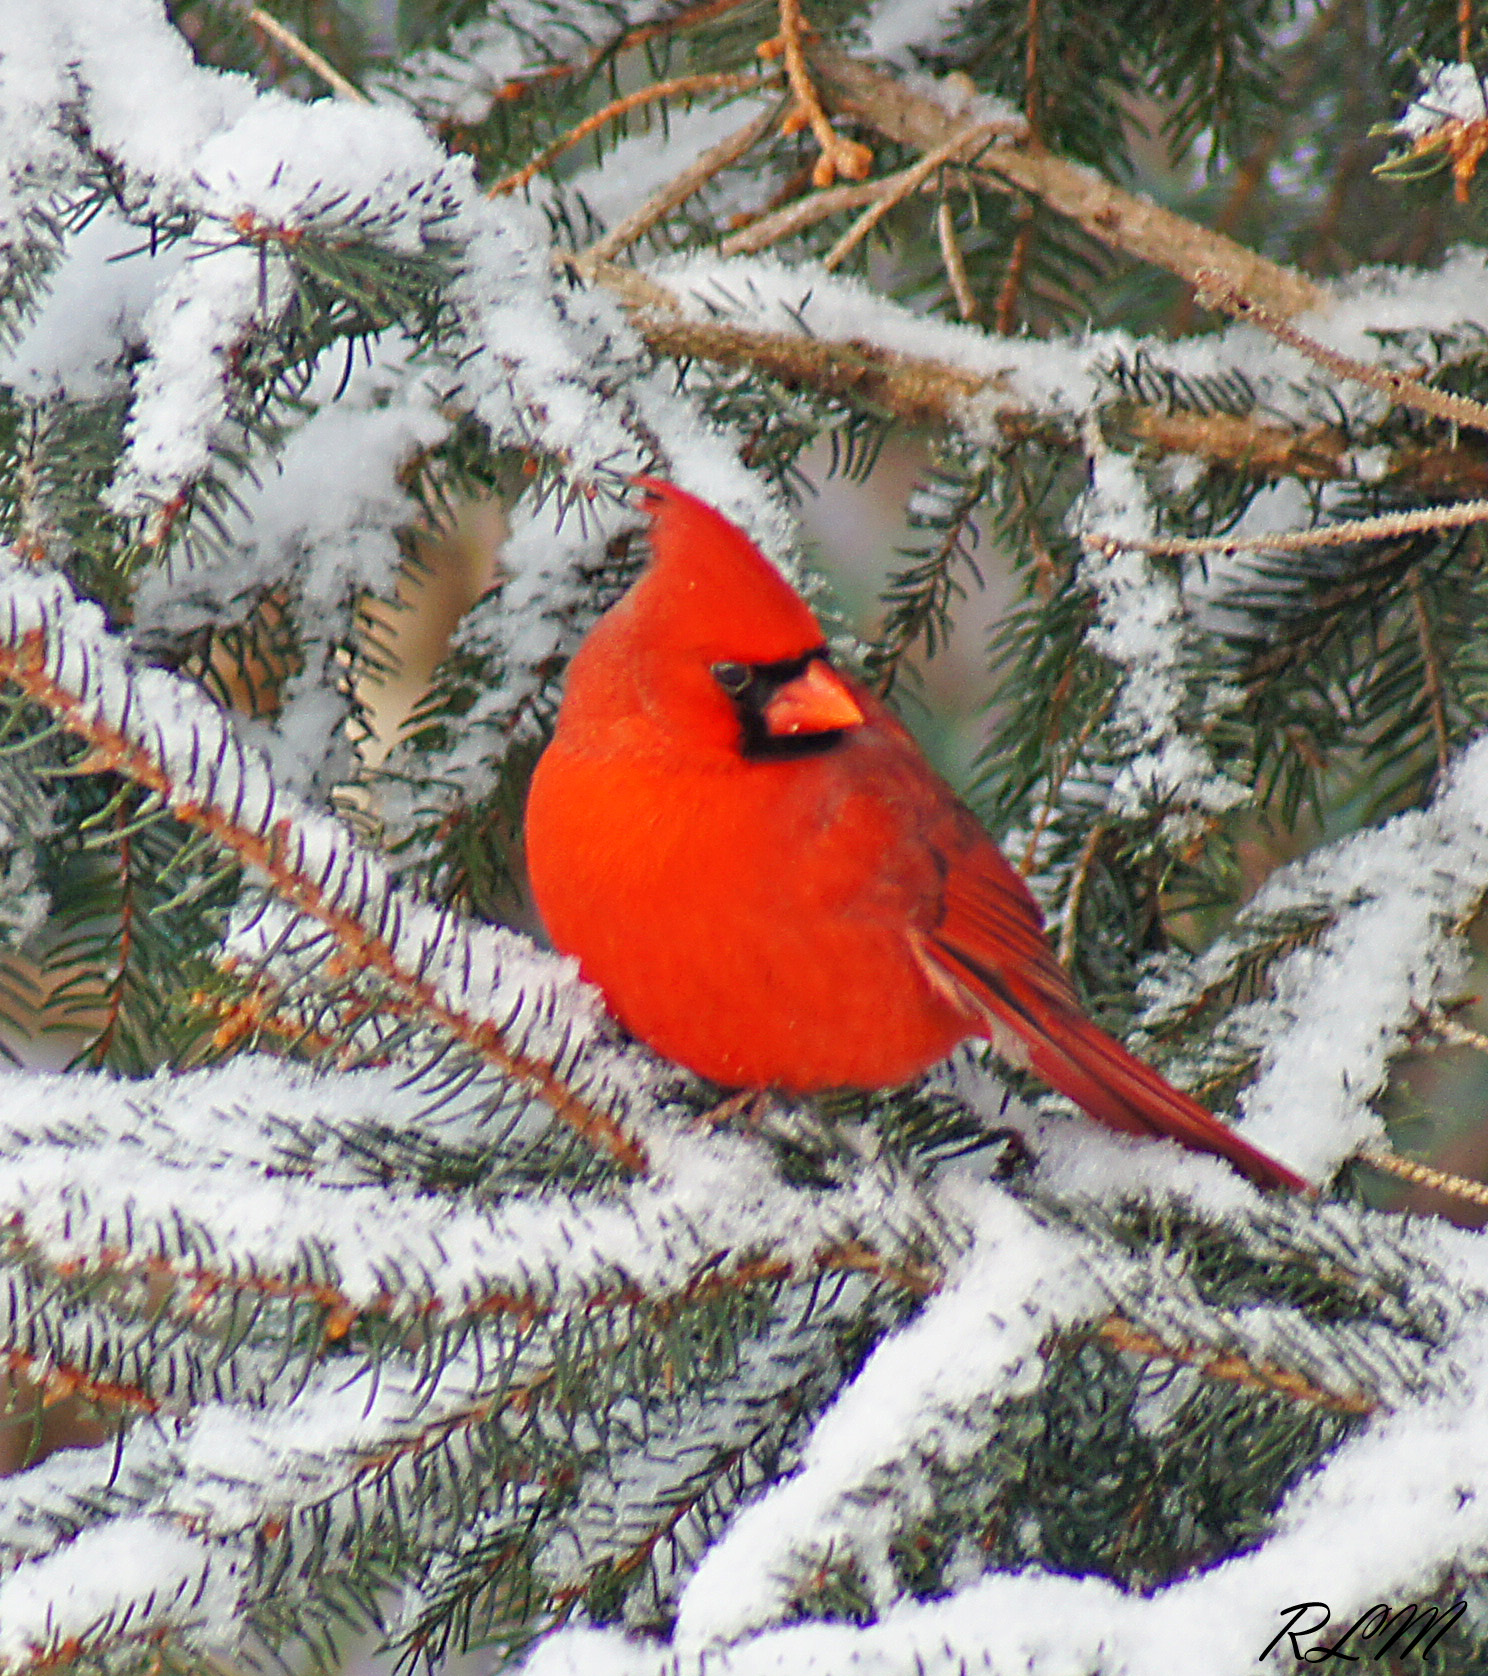 What You Need To Know About Birds in Winter